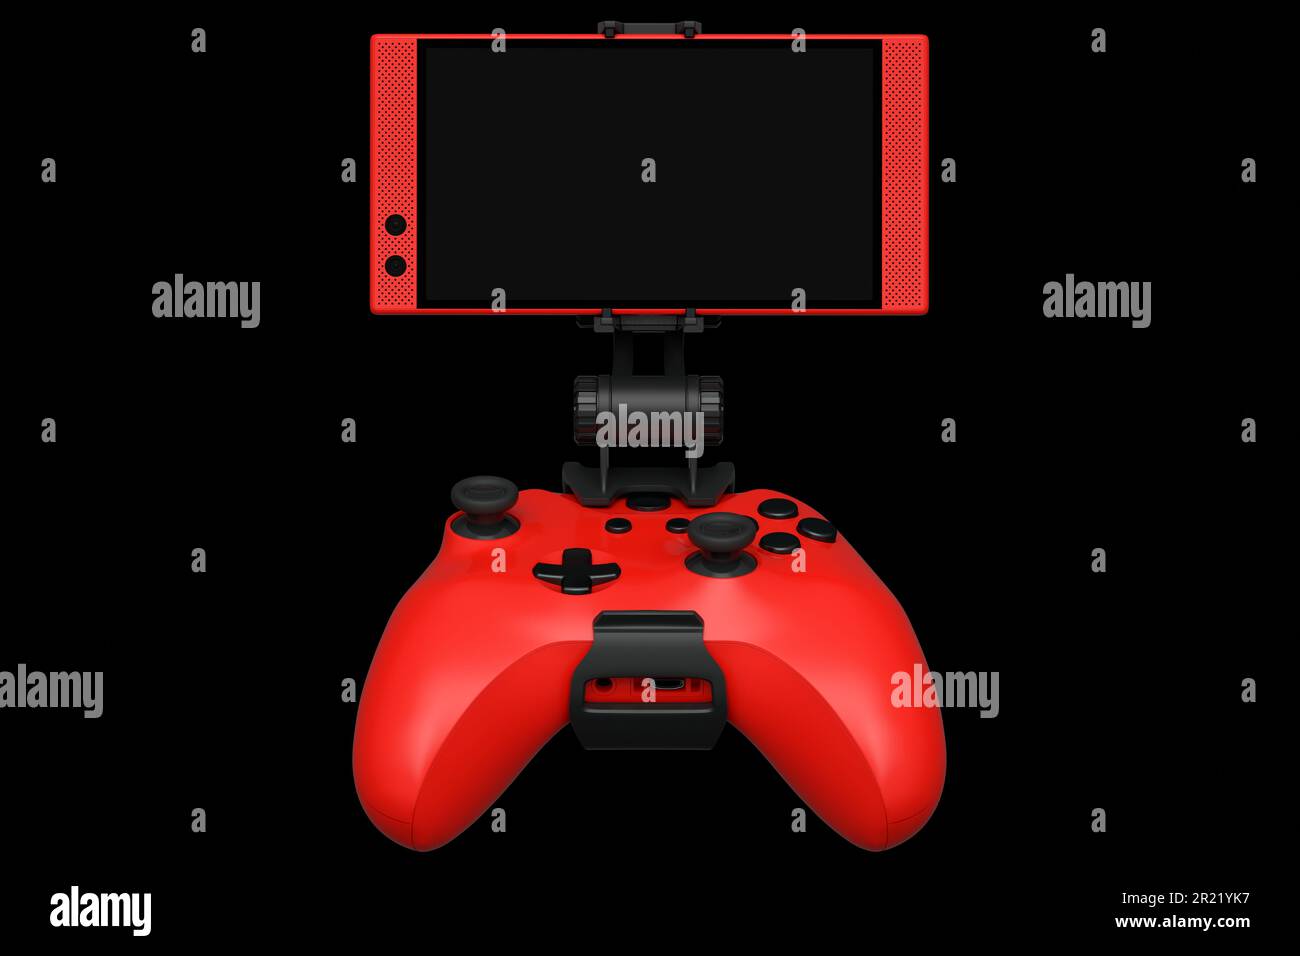 Realistic red joystick for playing games on a mobile phone on black background